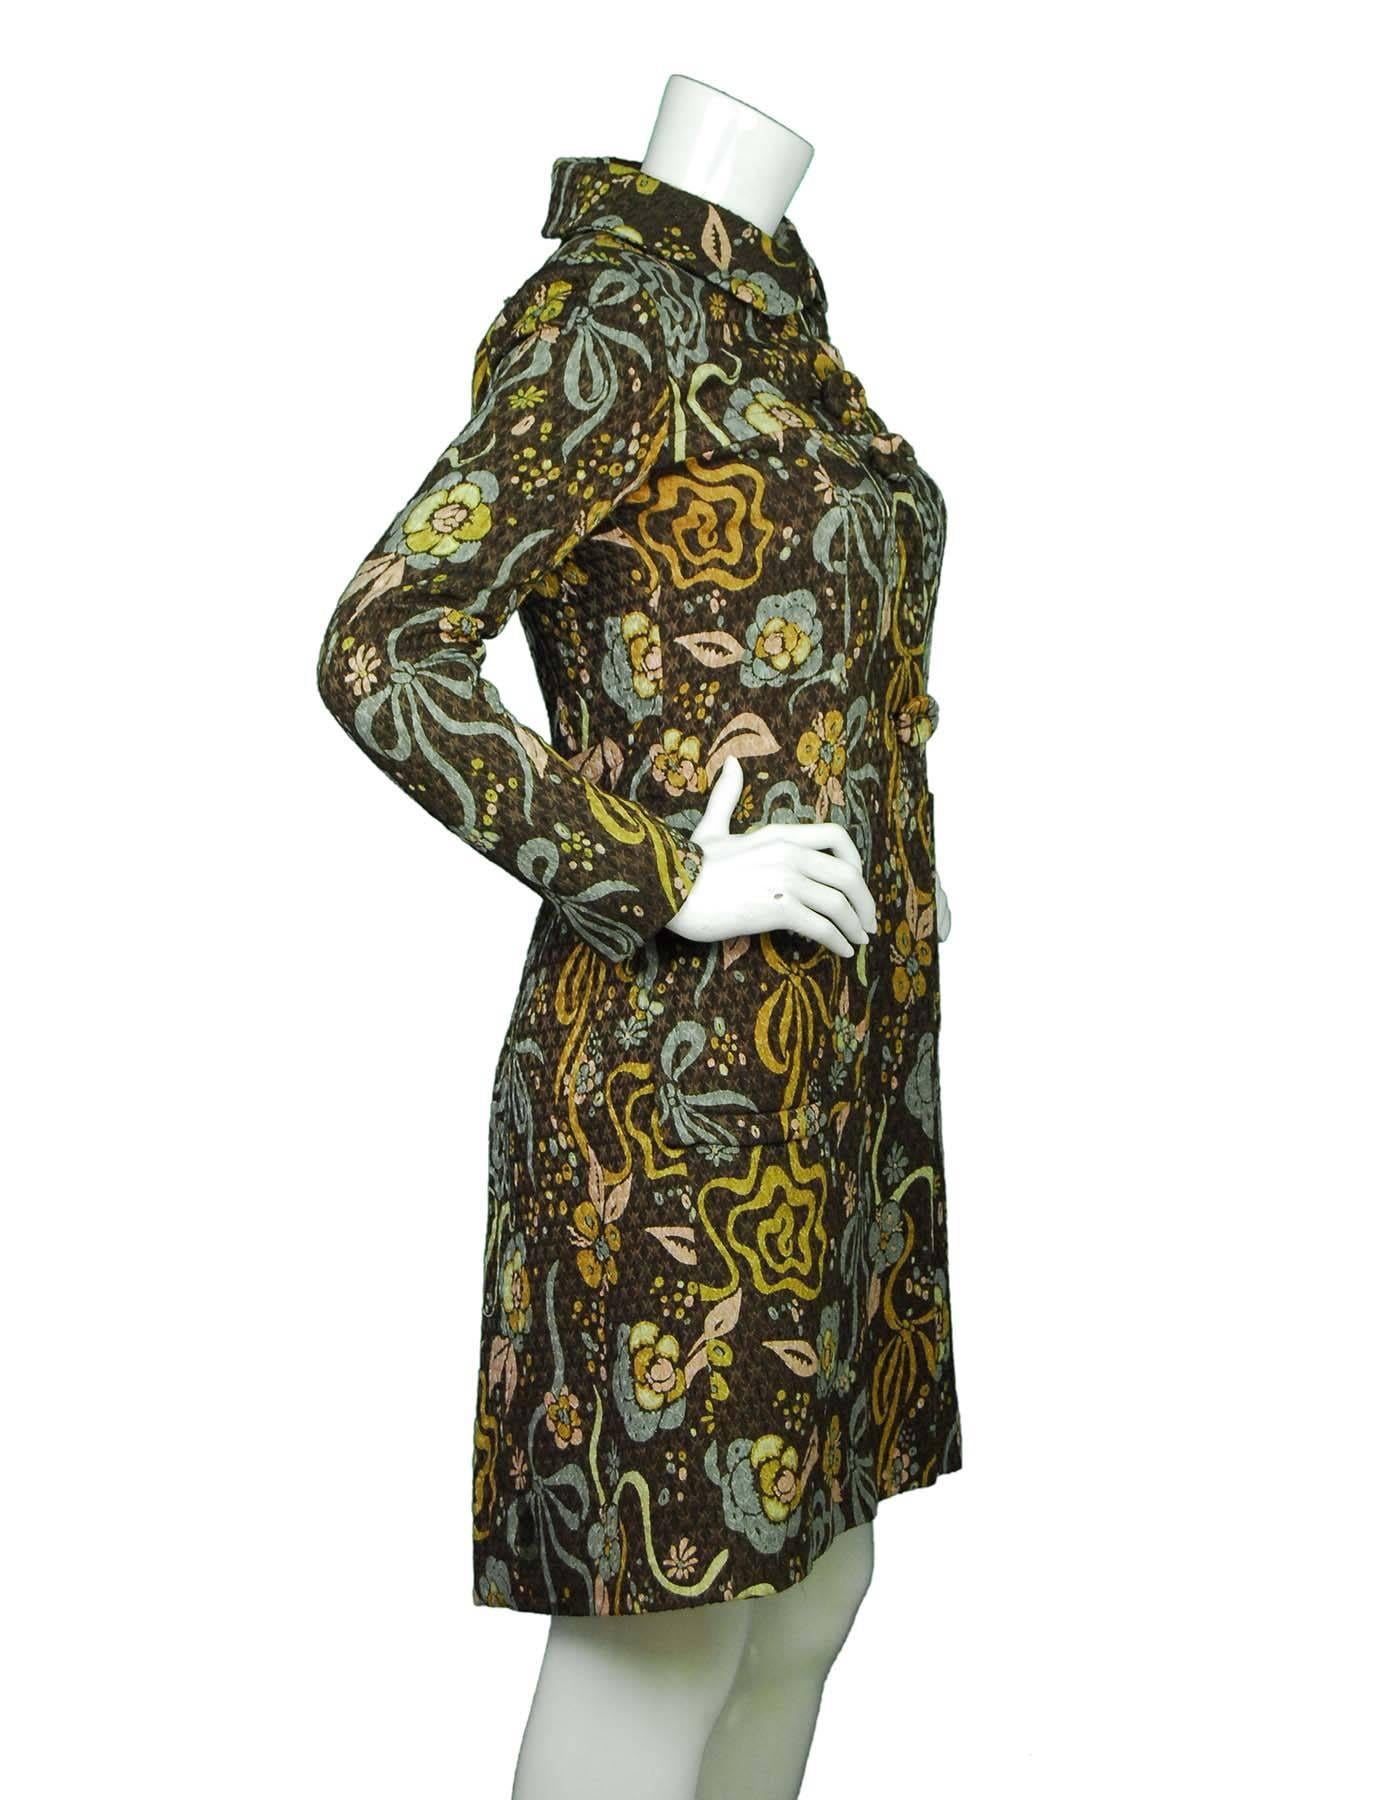 Emanuel Ungaro Brown Floral Coat Sz 6

Made In: Italy
Color: Brown, green, taupe
Composition: 55% pure new wool,  45% silk
Lining: Taupe 100% Silk
Closure/Opening: Front zip button closure
Exterior Pockets: Two hip pockets
Interior Pockets: